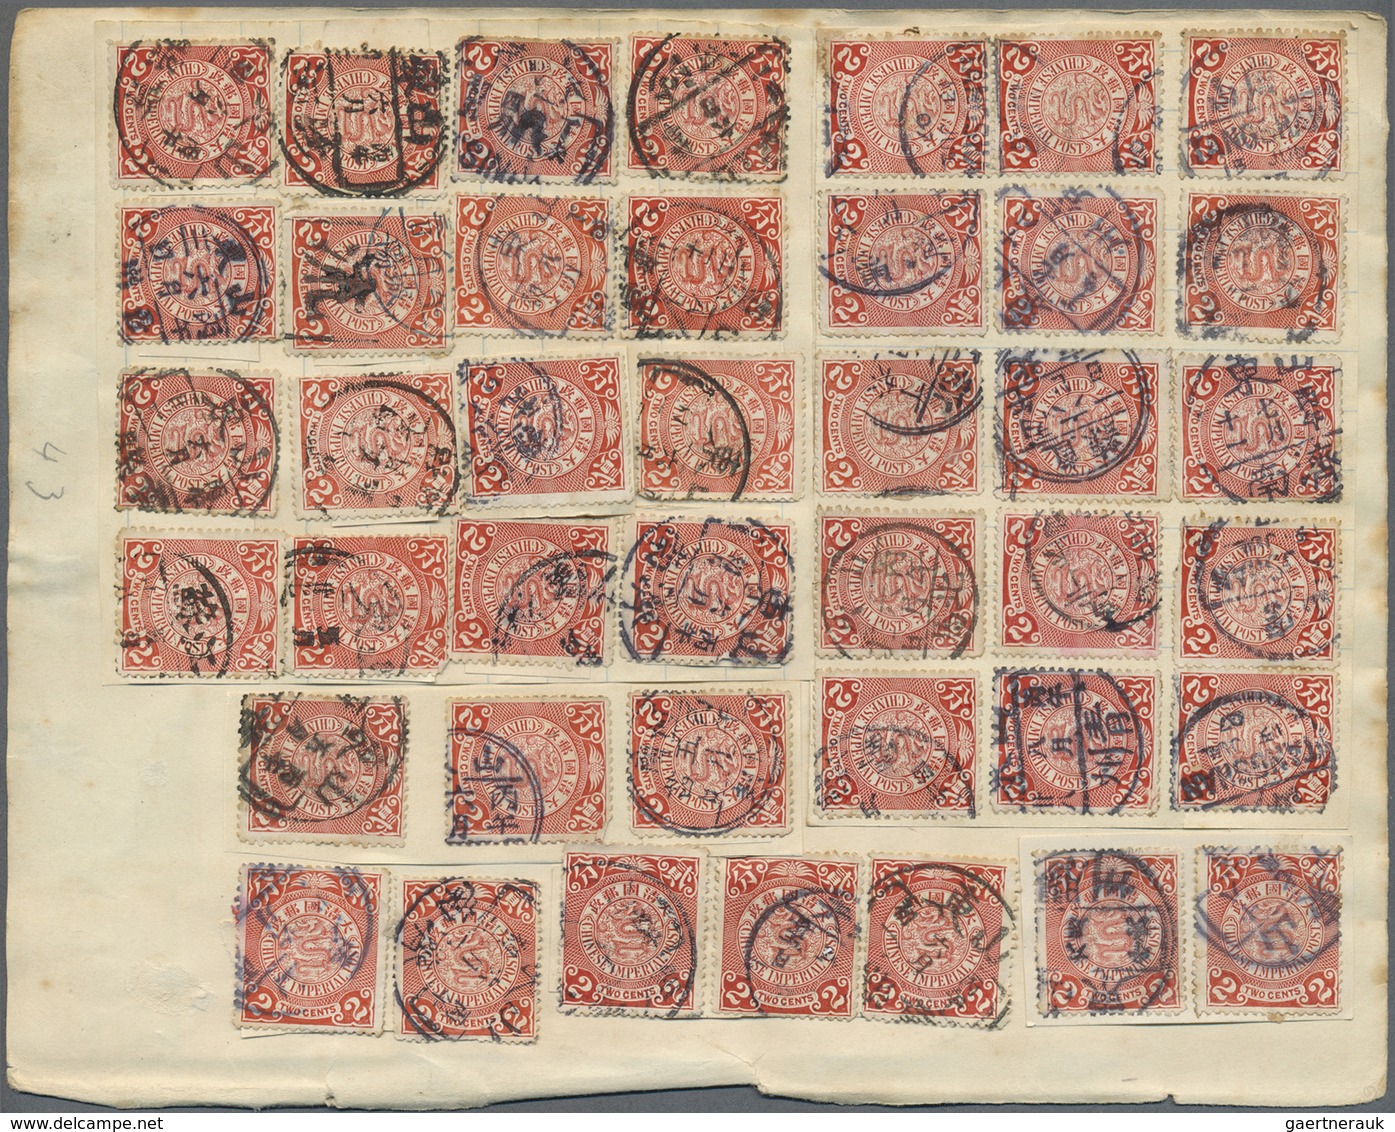 O China: 1898/1930 (ca.), 200+ used, mainly coiling dragons 1 C./4 C. from places in Shantung or Chihl